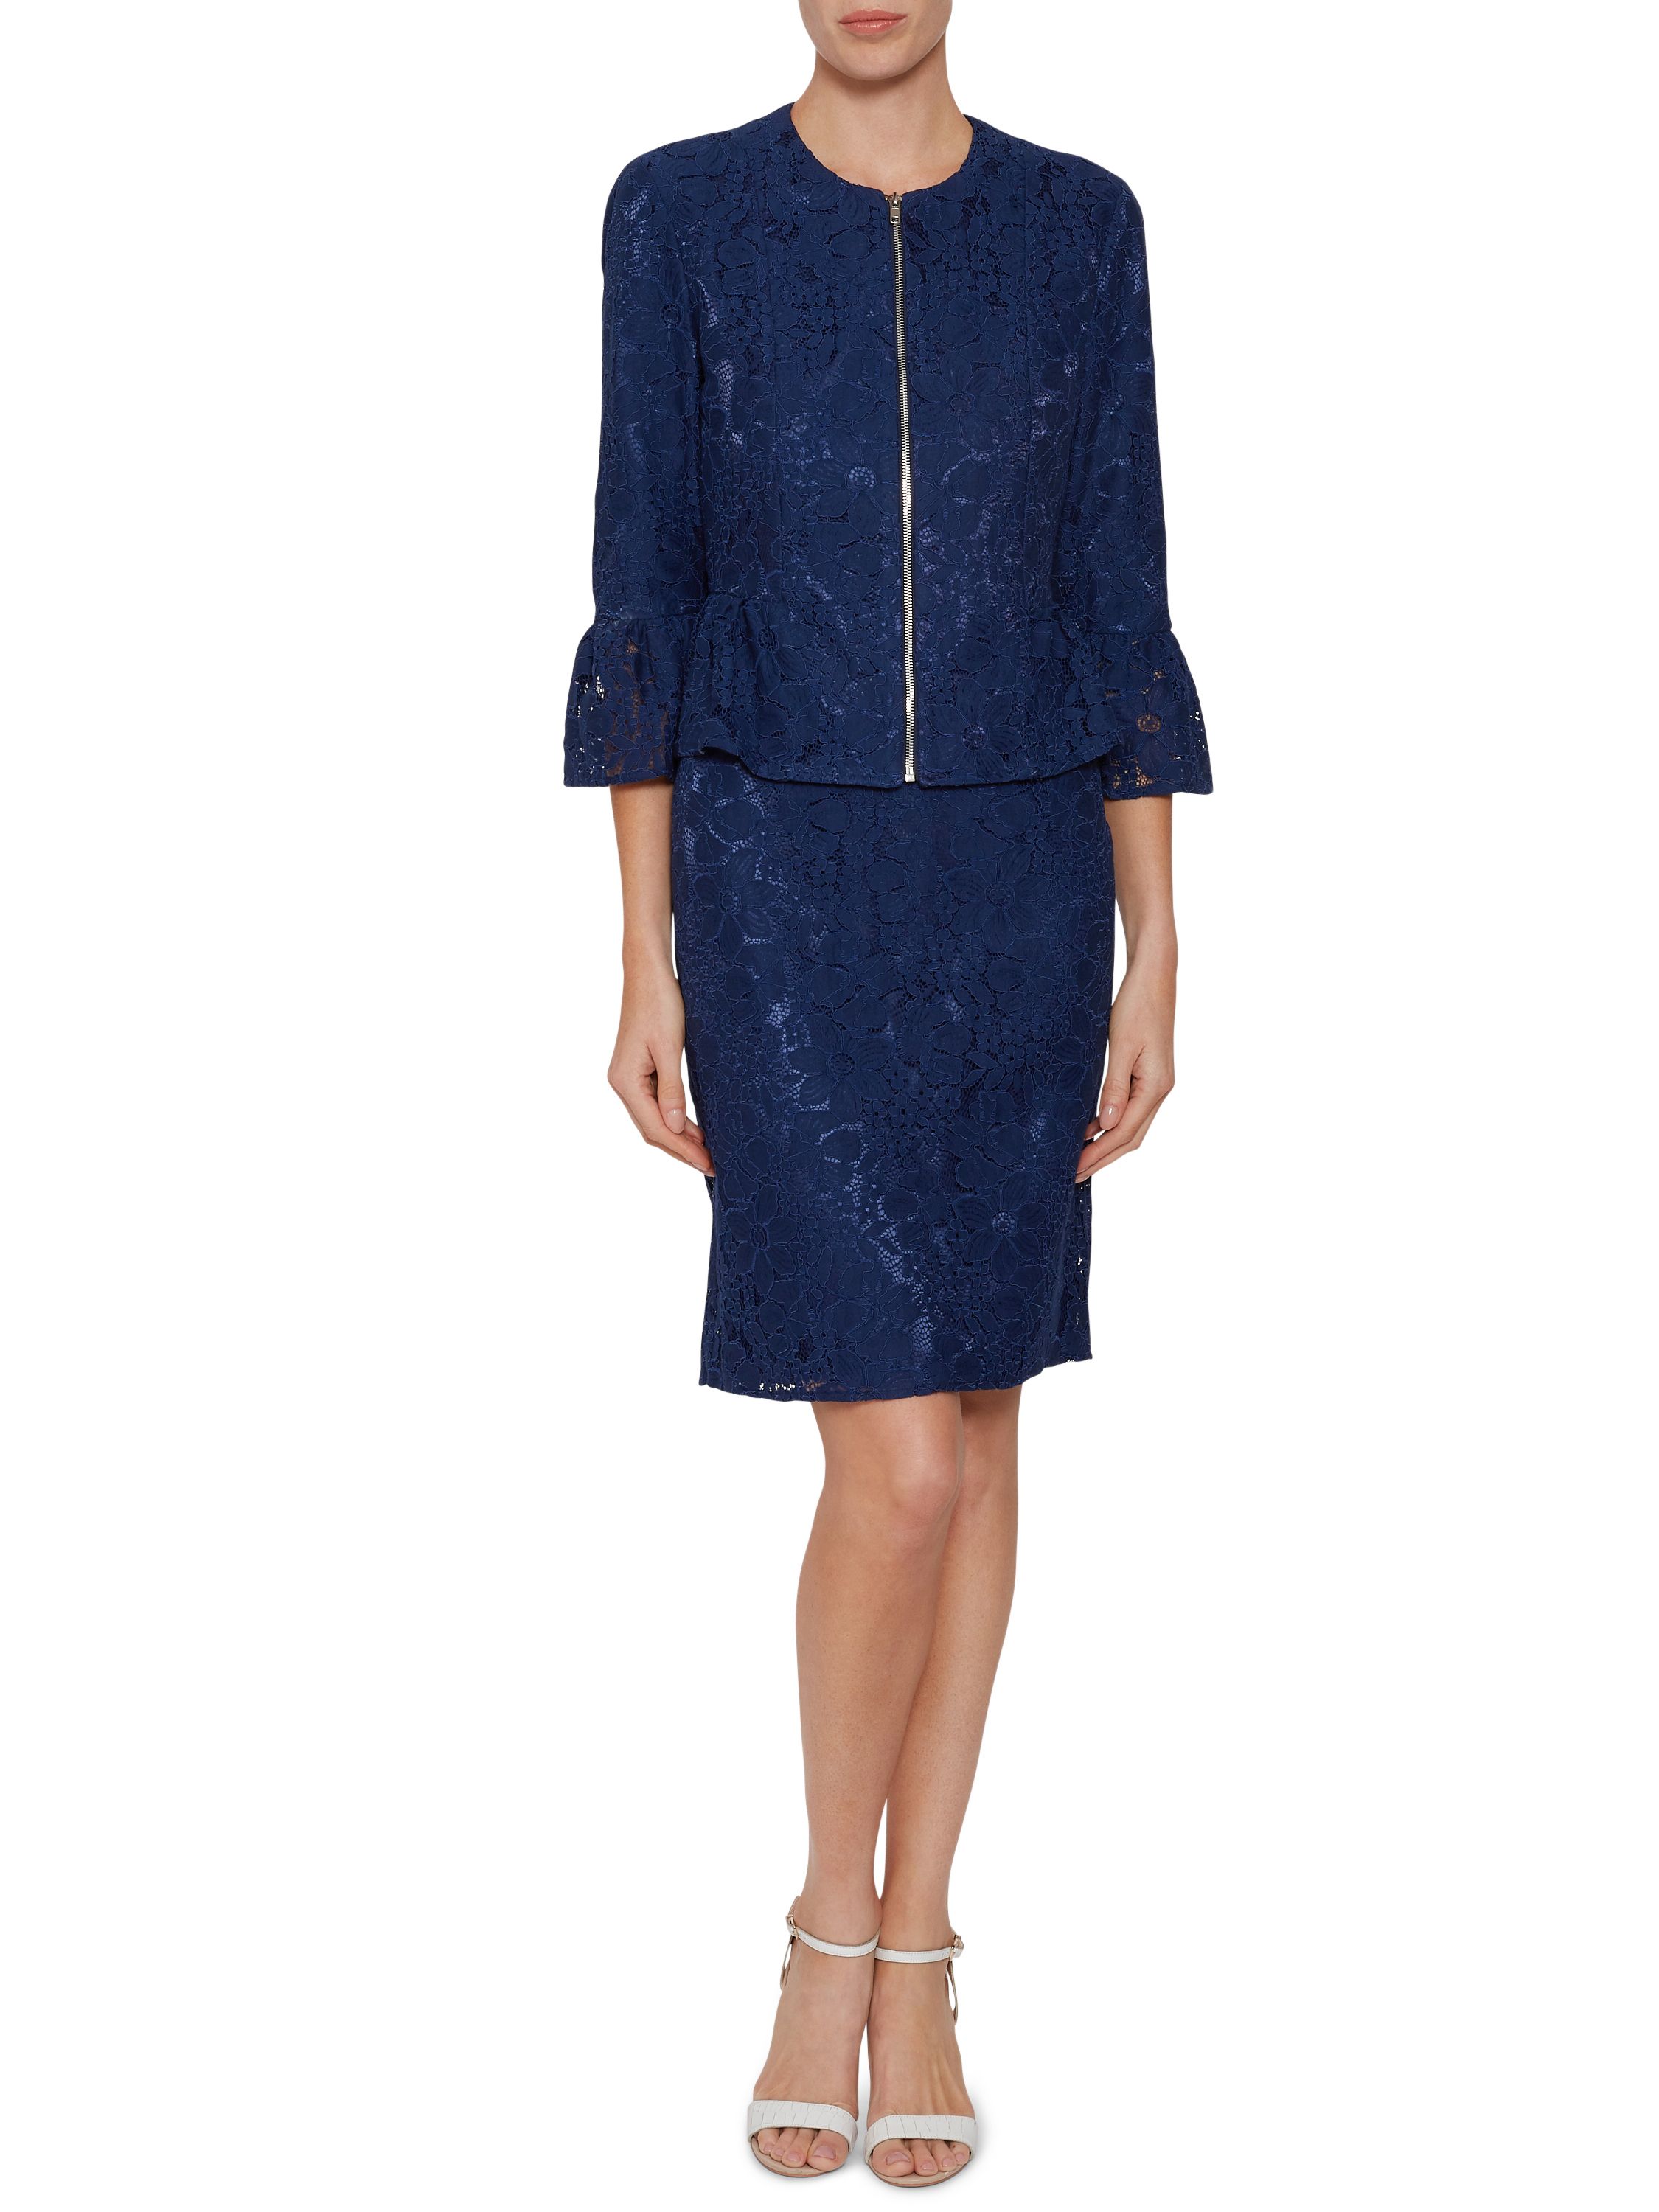 Gina Bacconi presents its smart lace dress and jacket combination. Both pieces in the set are fashioned from a gorgeous floral corded lace. The dress is well fitted and features a scoop neckline and back, while the jacket takes a flared sleeve and peplum waist for a classy touch. The dress is fastened using an invisible back zip and the jacket features a zip at the front. For added comfort the dress is lined with a soft jersey fabric.